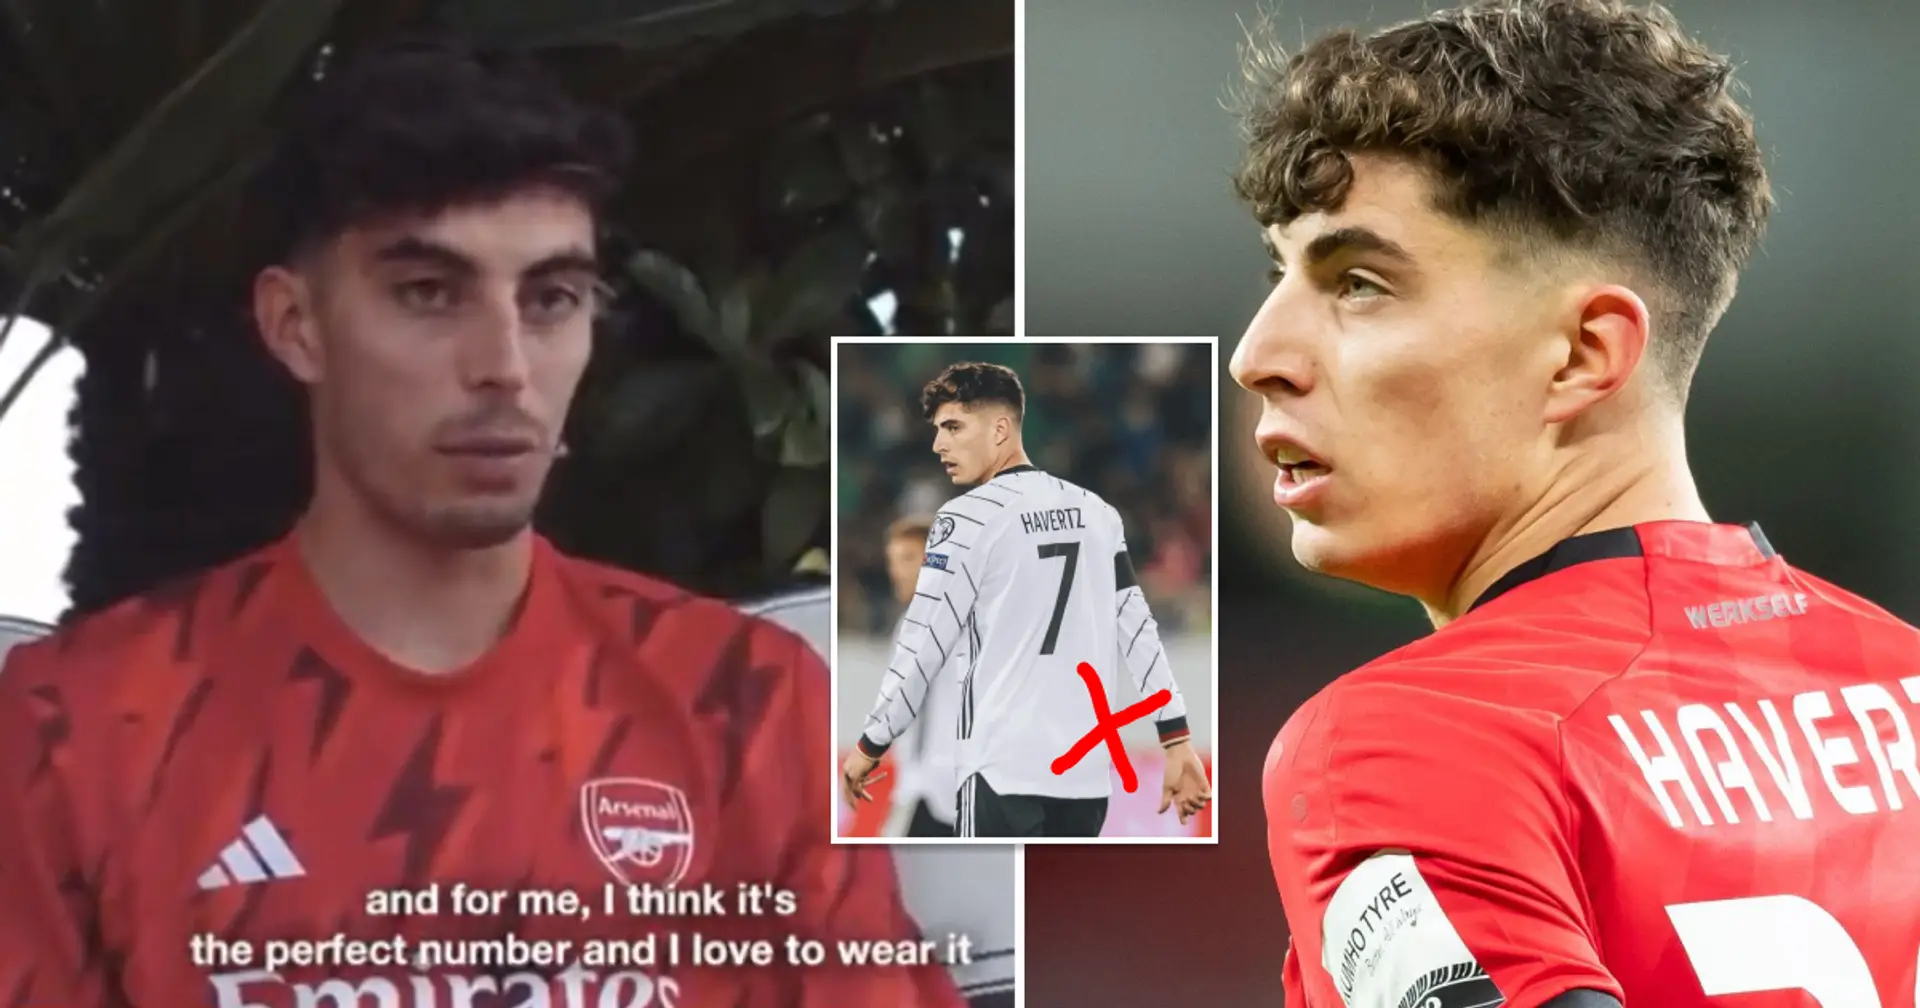 Kai Havertz reveals Arsenal shirt number: 'I'd love to wear it in a red shirt again'